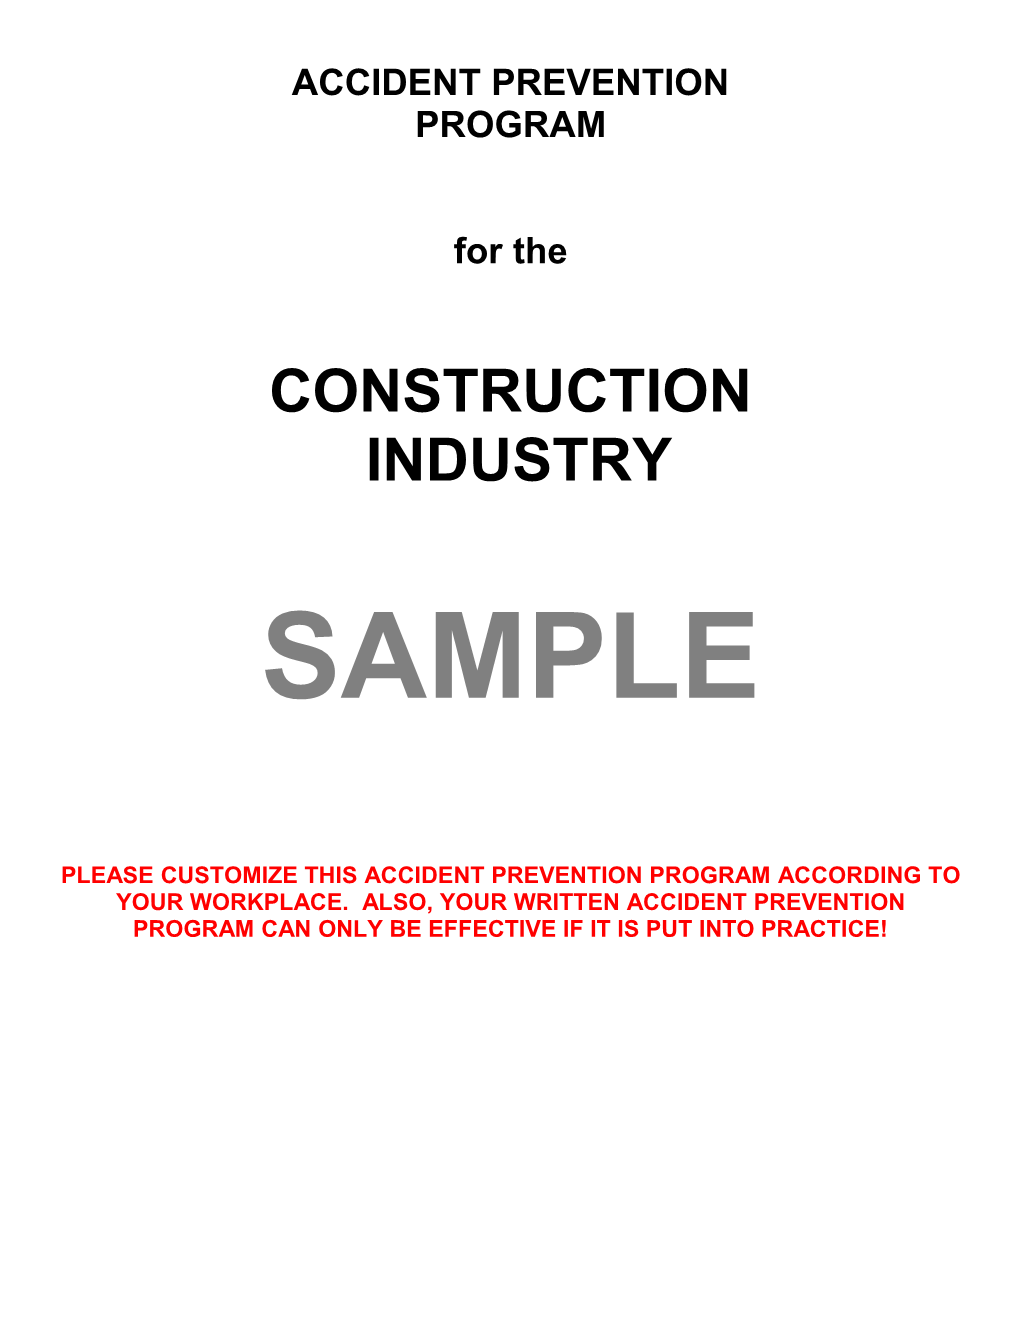 Sample Accident Prevention Program (APP) for the Construction Industry